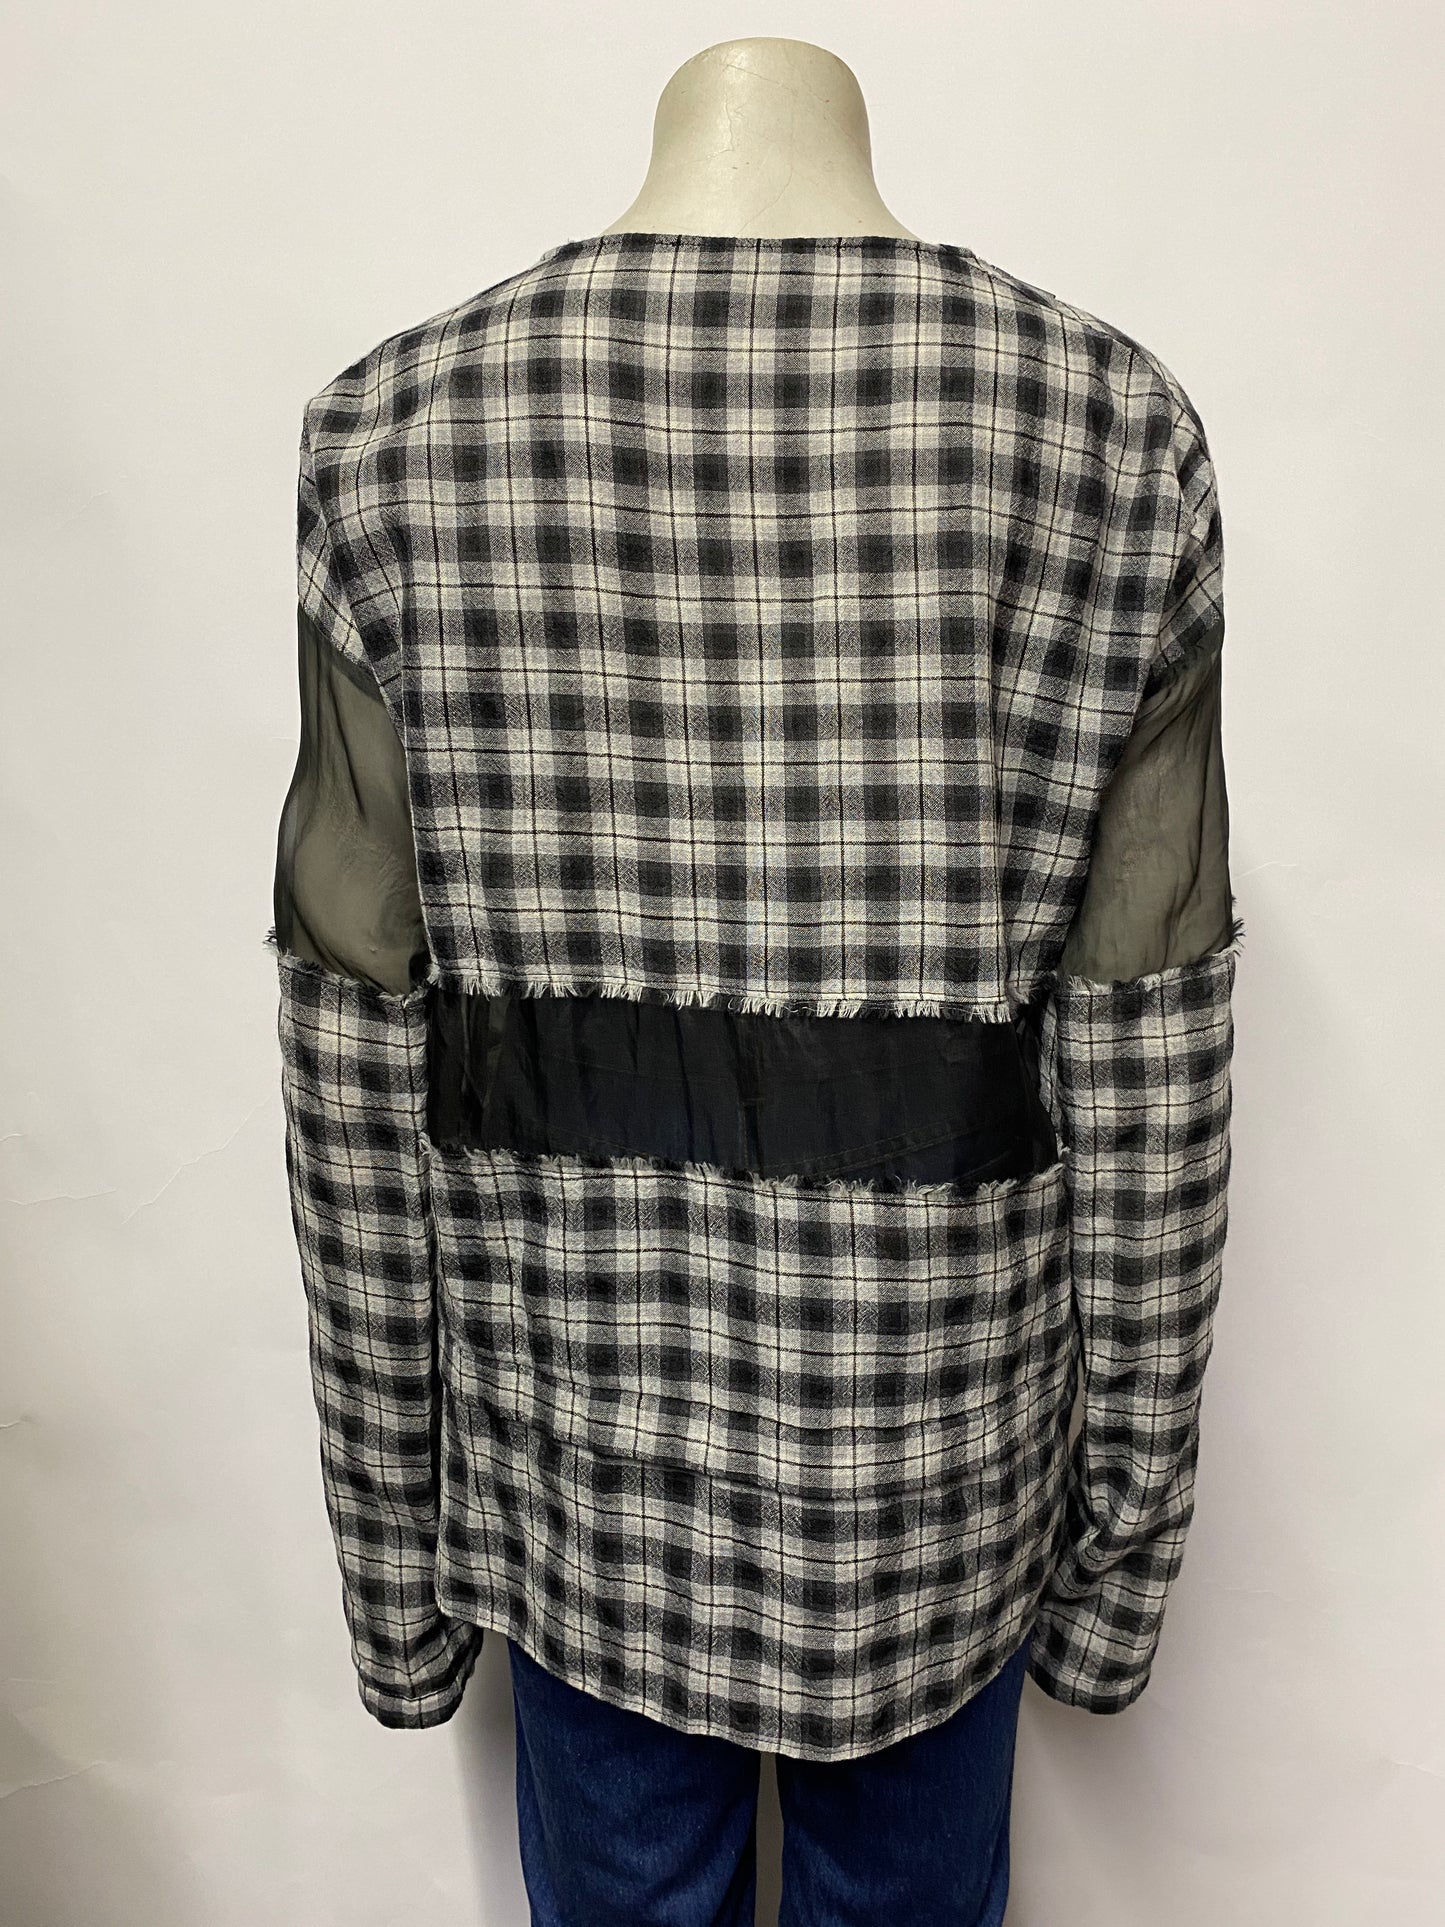 Belstaff Black & White Chequered Sheer Panel Top Blouse 40